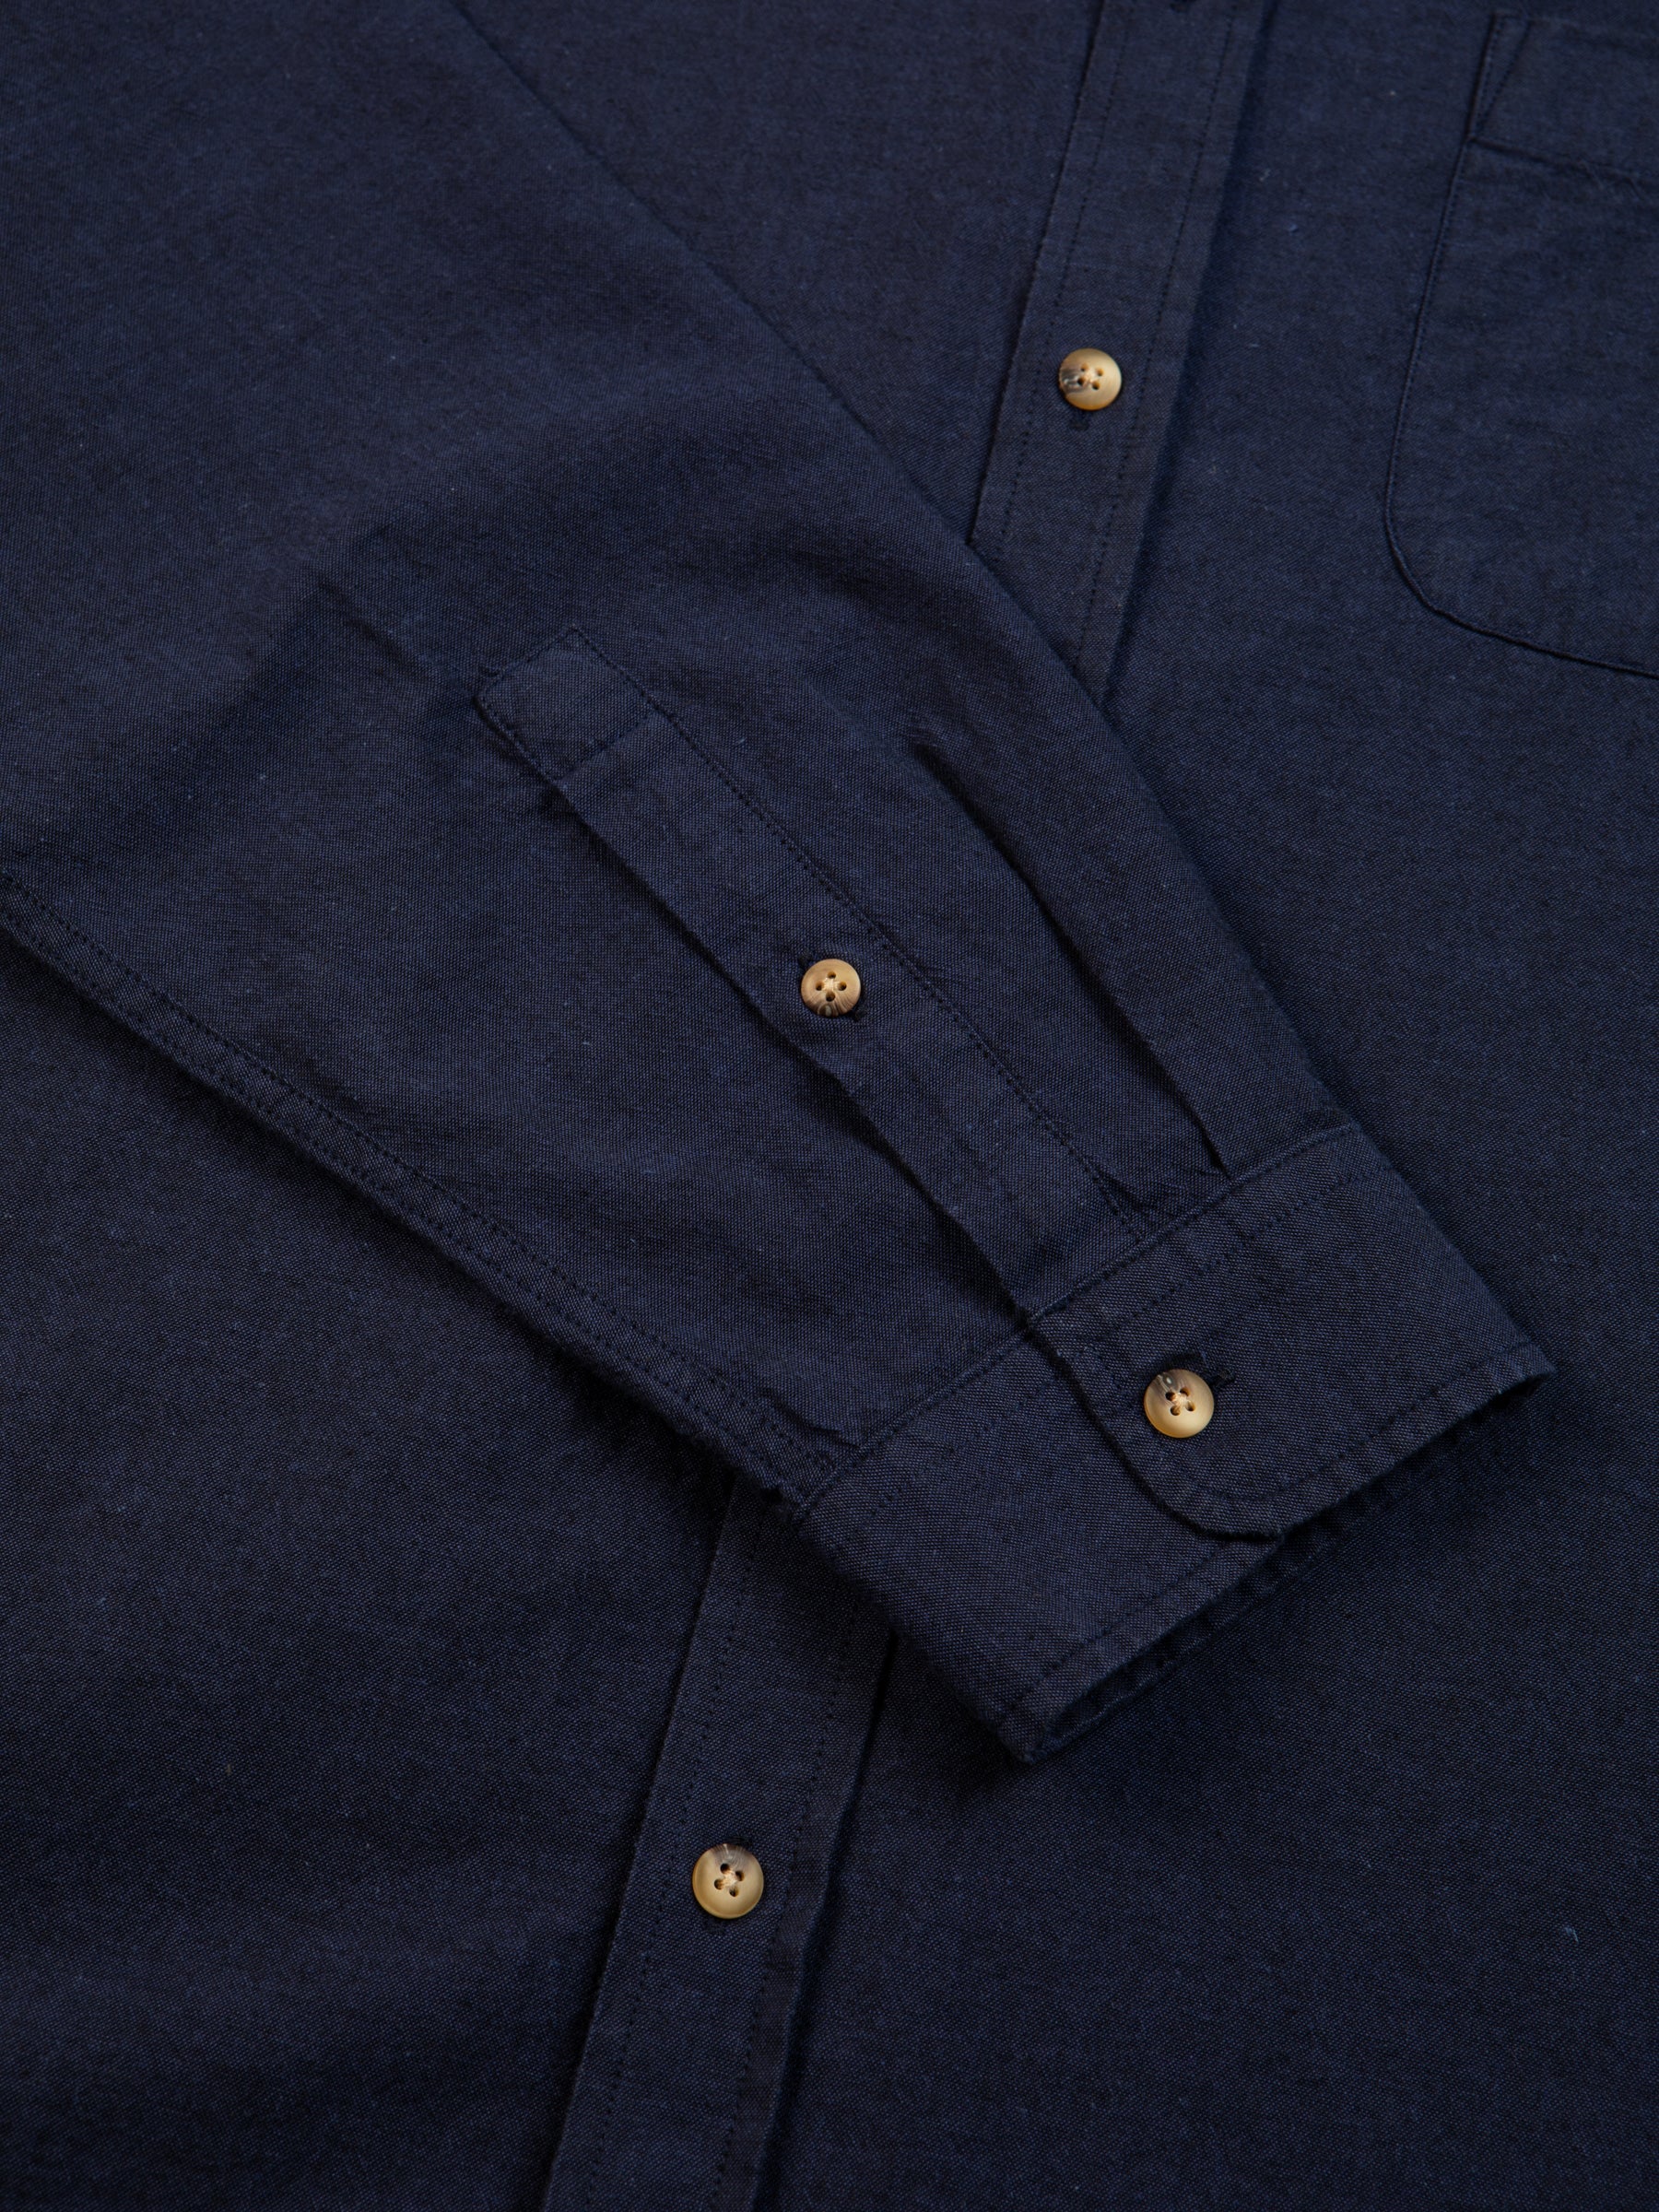 A buttoned shirt cuff from premium menswear brand KESTIN, made from a comfortable Oxford material.